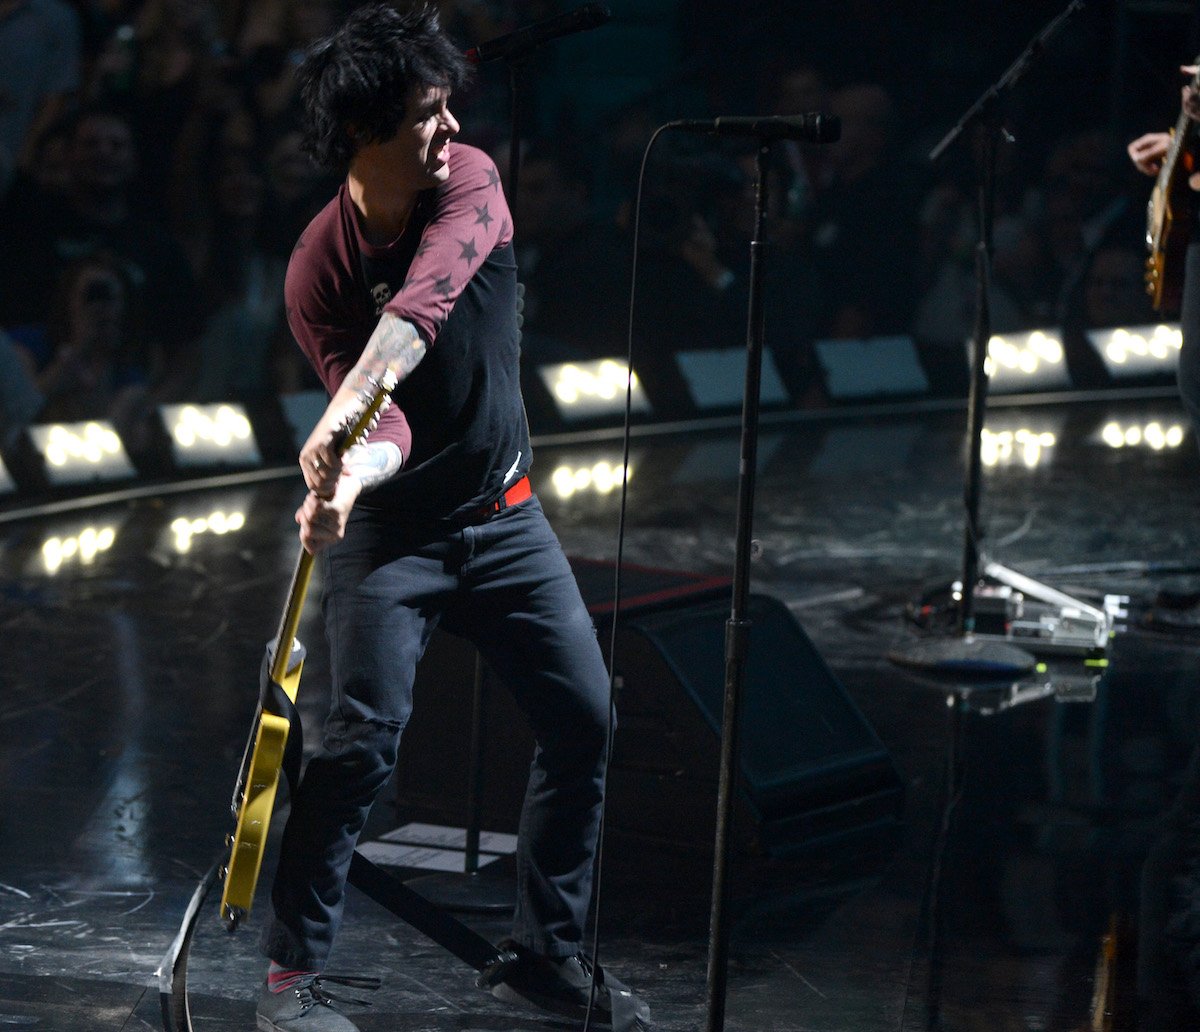 Billie Joe Armstrong of Green Day smashes his guitar onstage during the 2012 iHeartRadio Music Festival